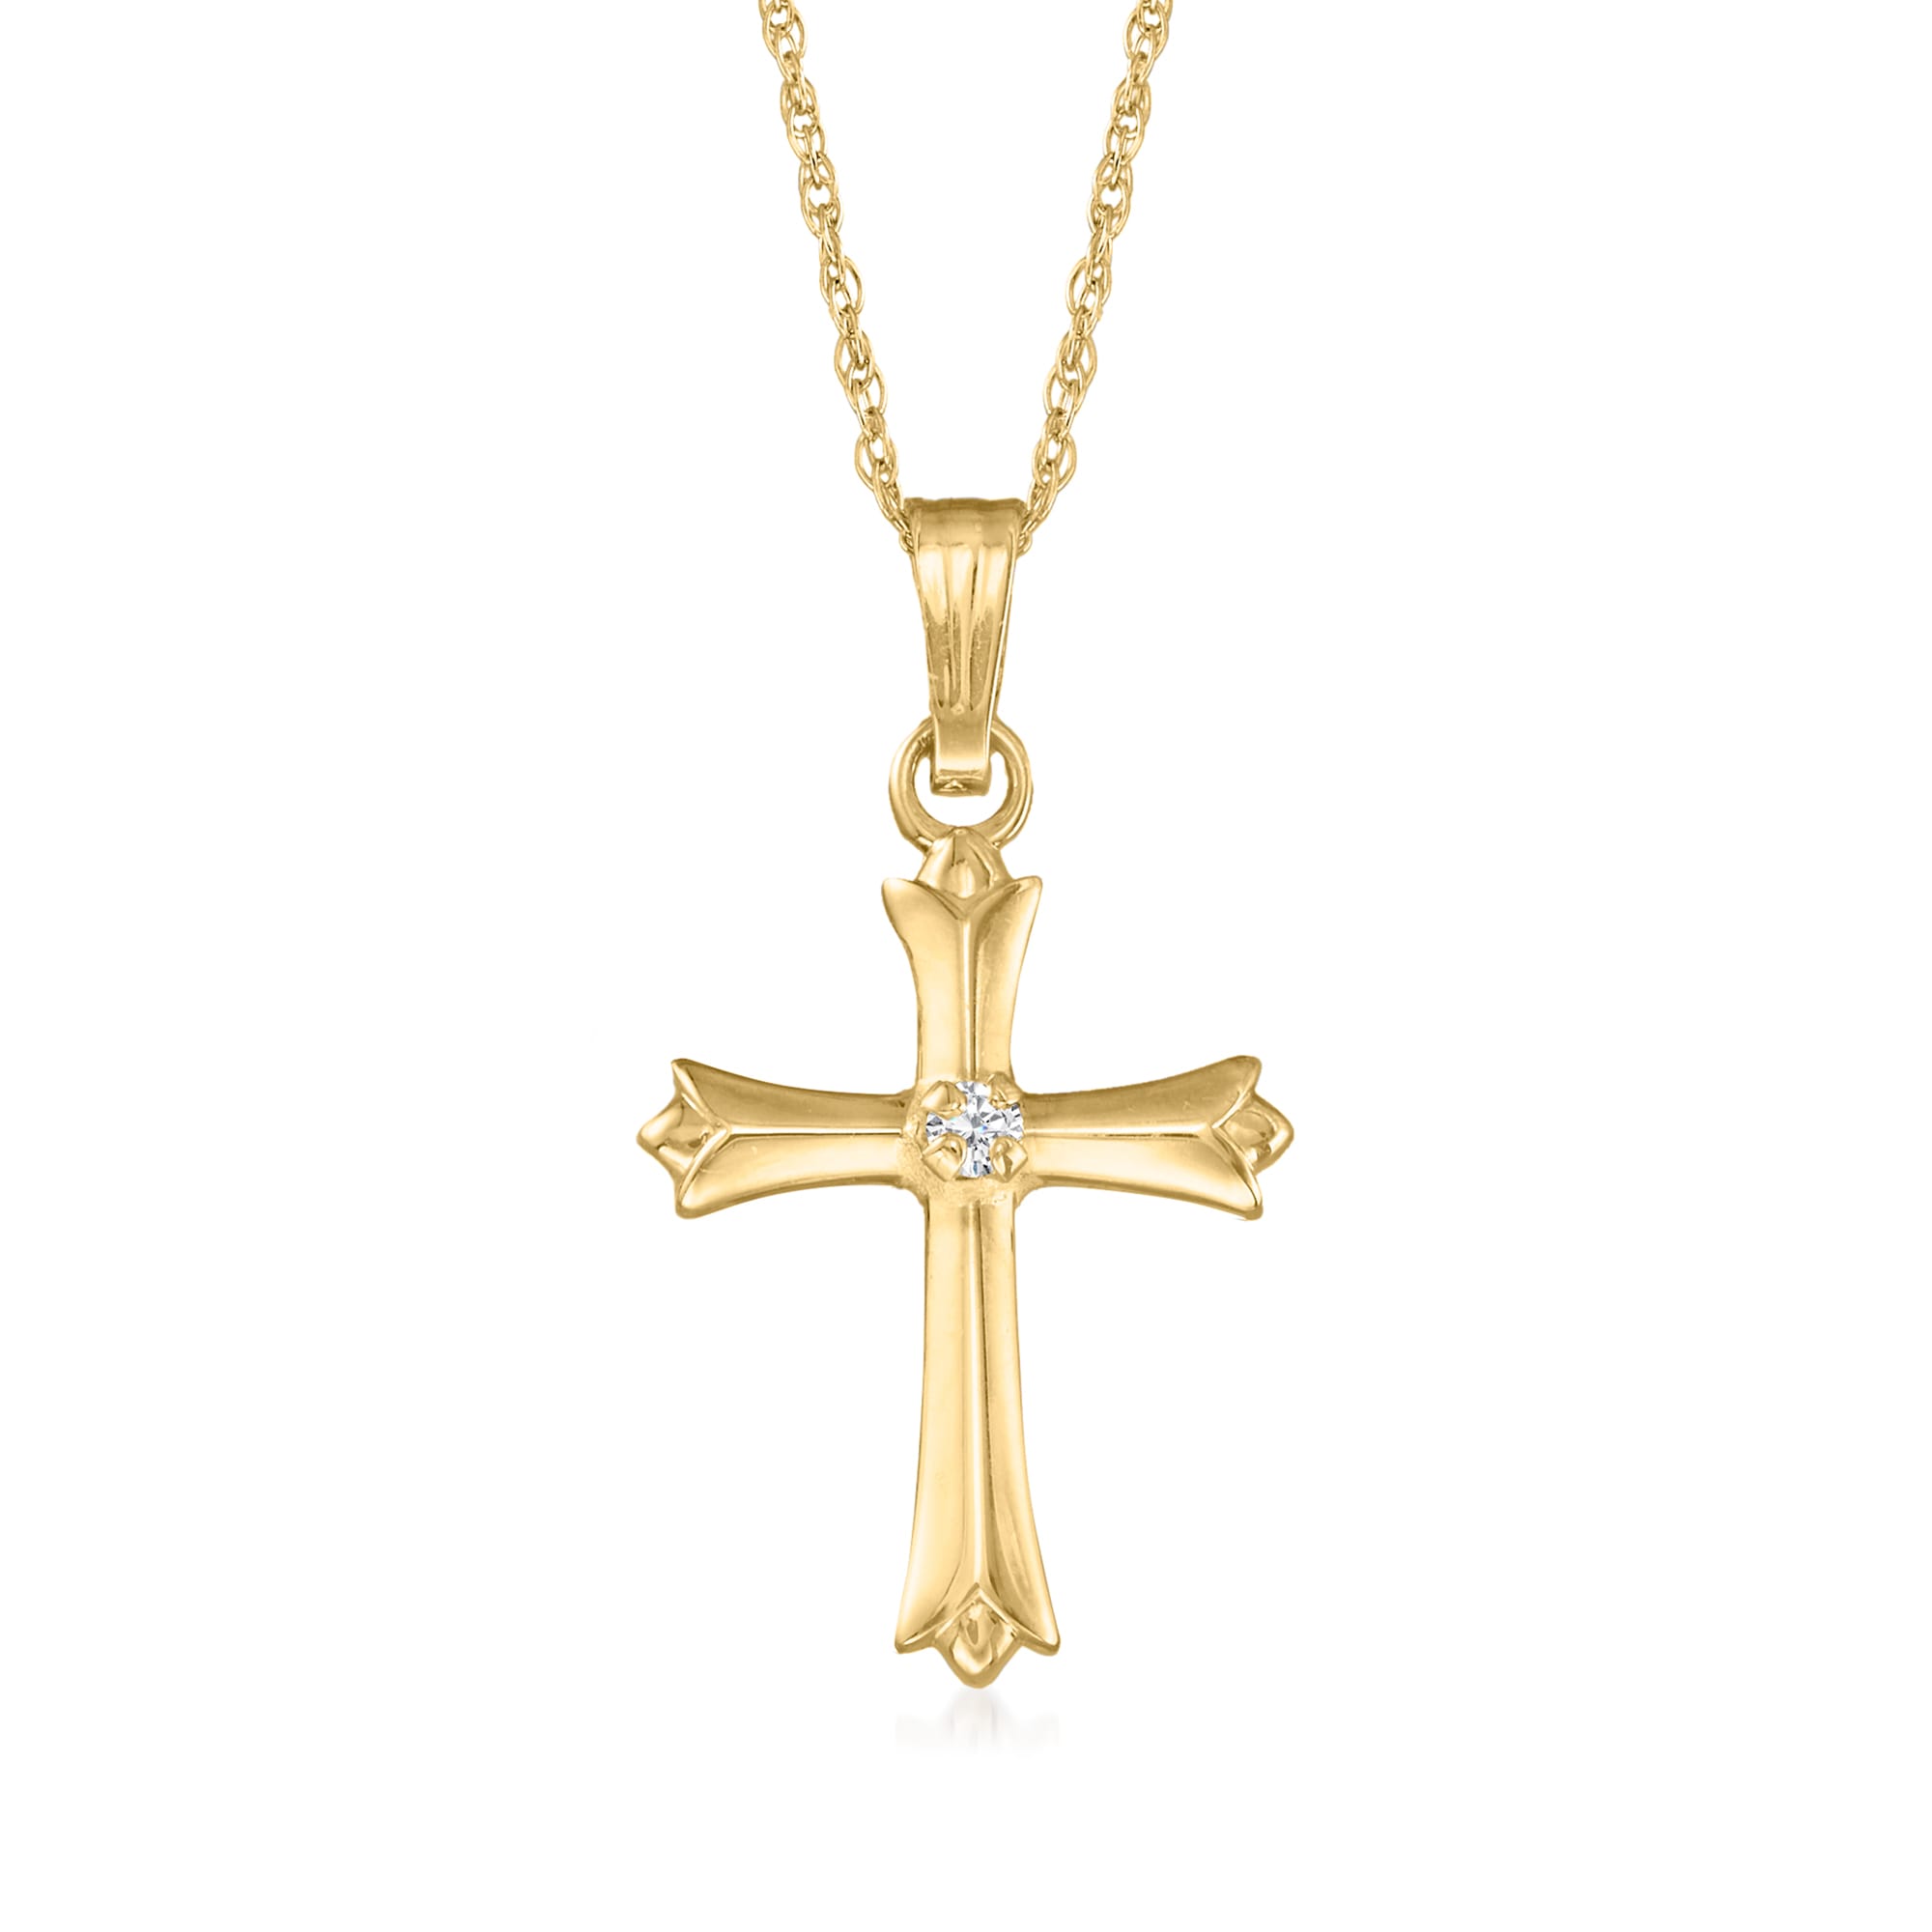 Child's 14kt Yellow Gold Cross Pendant Necklace with Diamond Accent. 15 ...